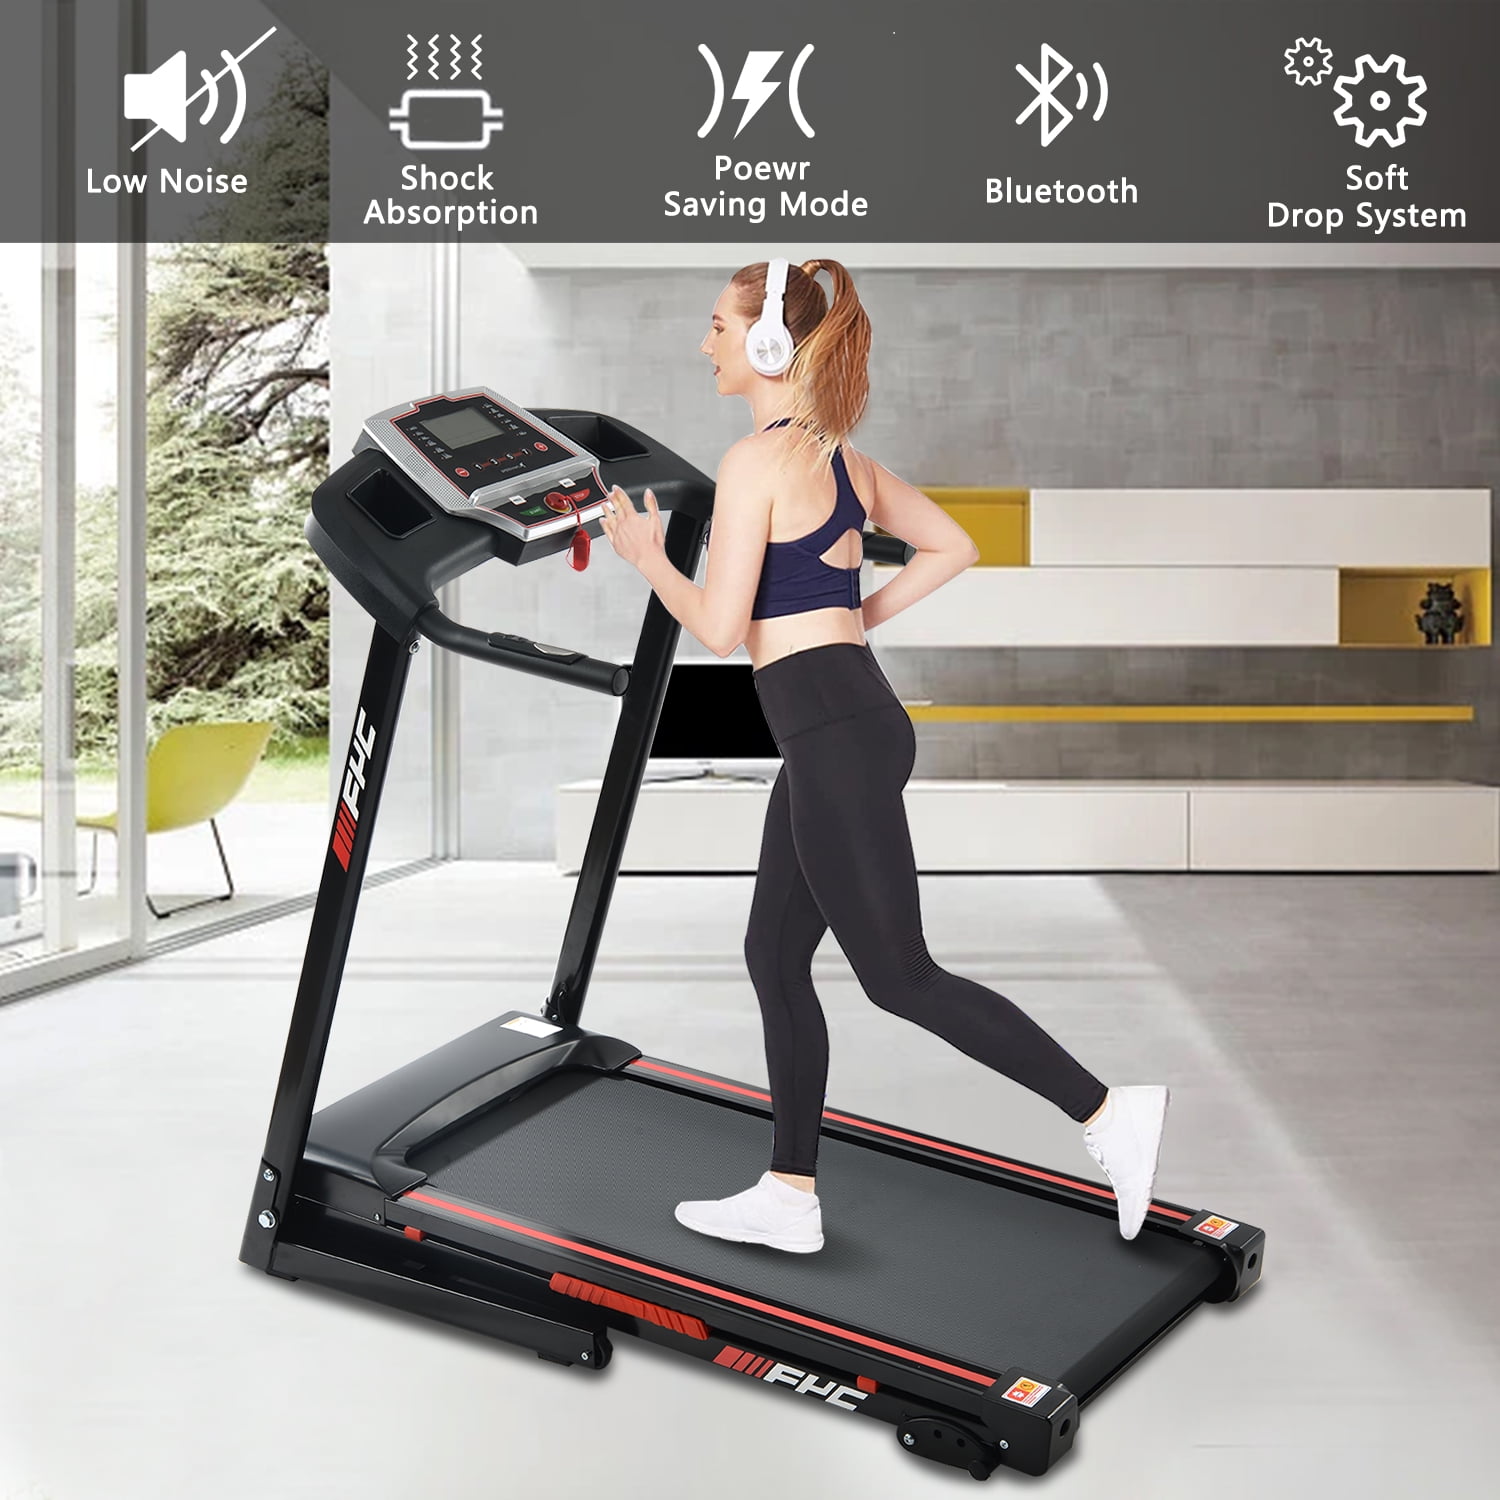 Details about   Folding Electric Treadmill 3.25HP Motorized Running Machine Exercise Equipment 